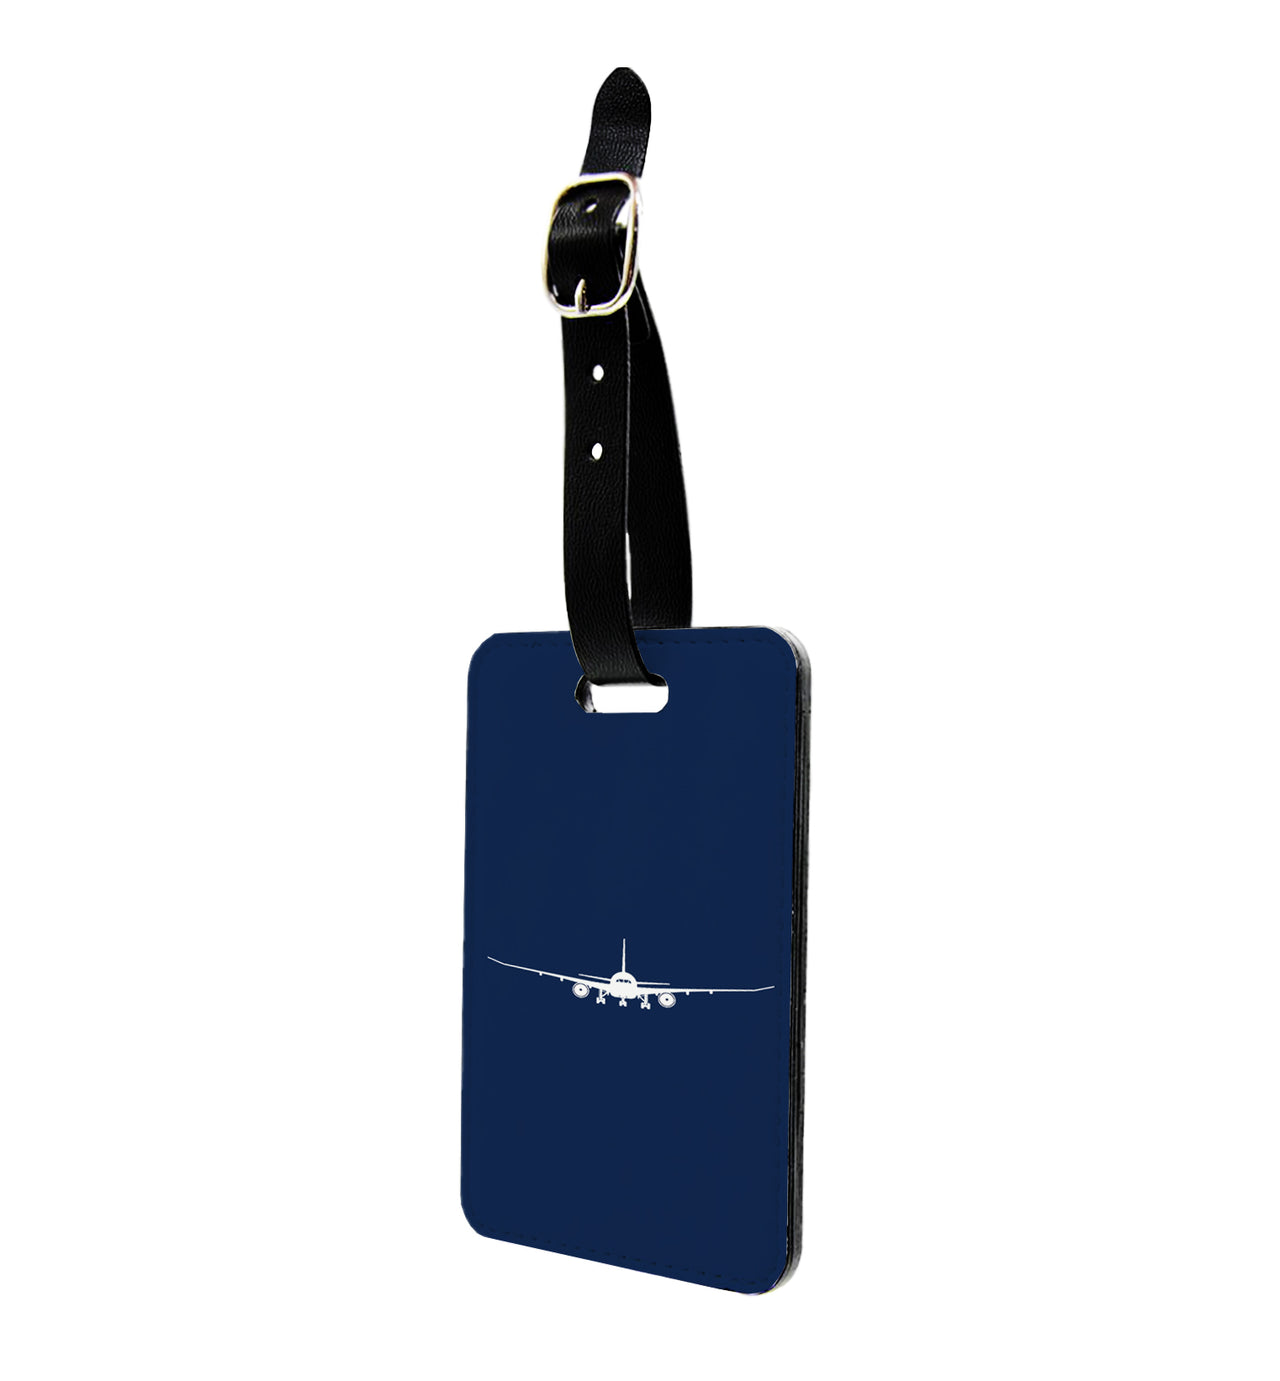 Boeing 787 Silhouette Designed Luggage Tag